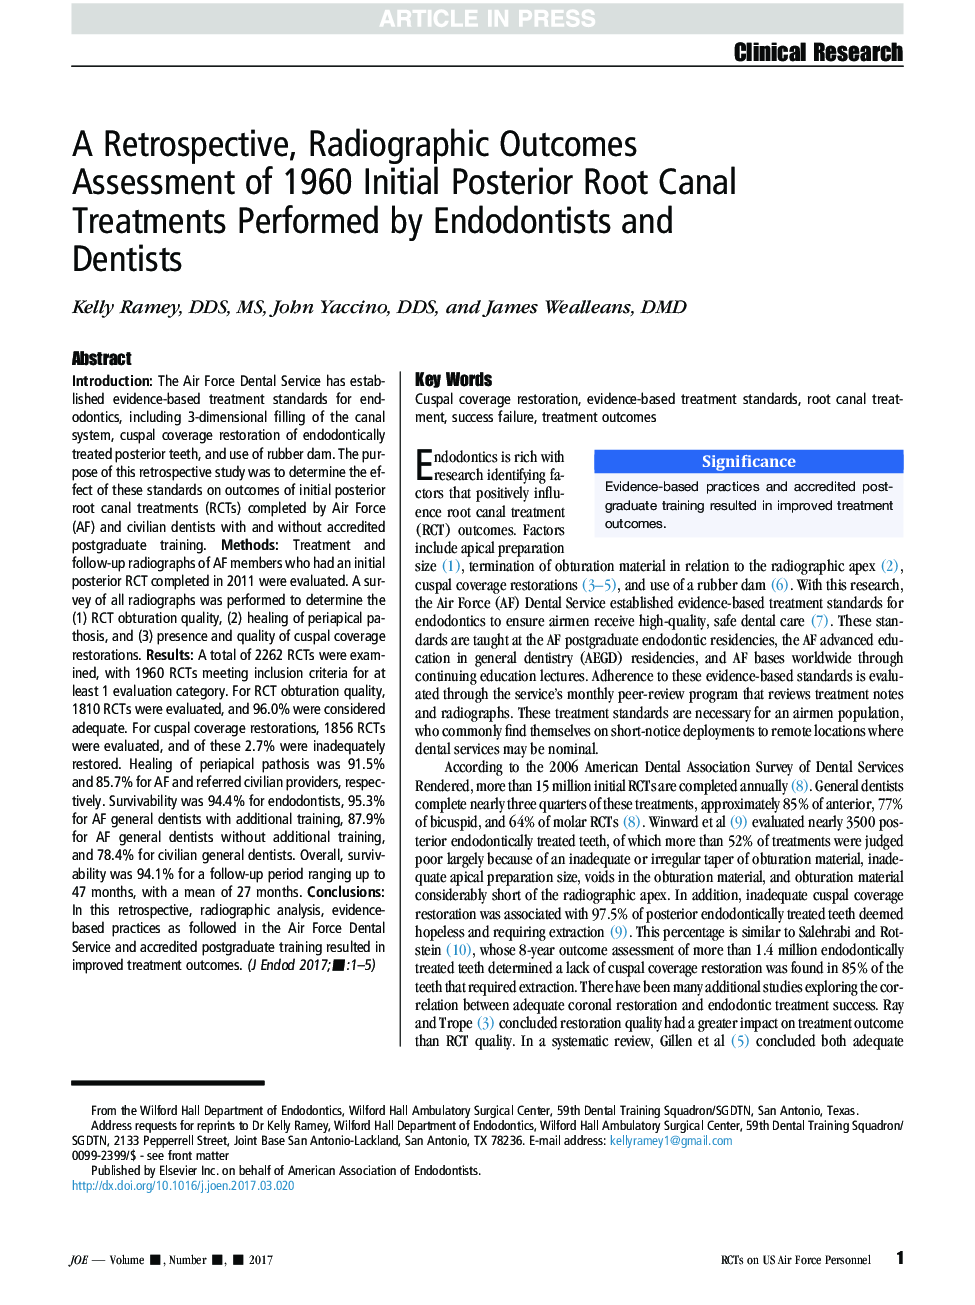 A Retrospective, Radiographic Outcomes Assessment of 1960 Initial Posterior Root Canal Treatments Performed by Endodontists and Dentists